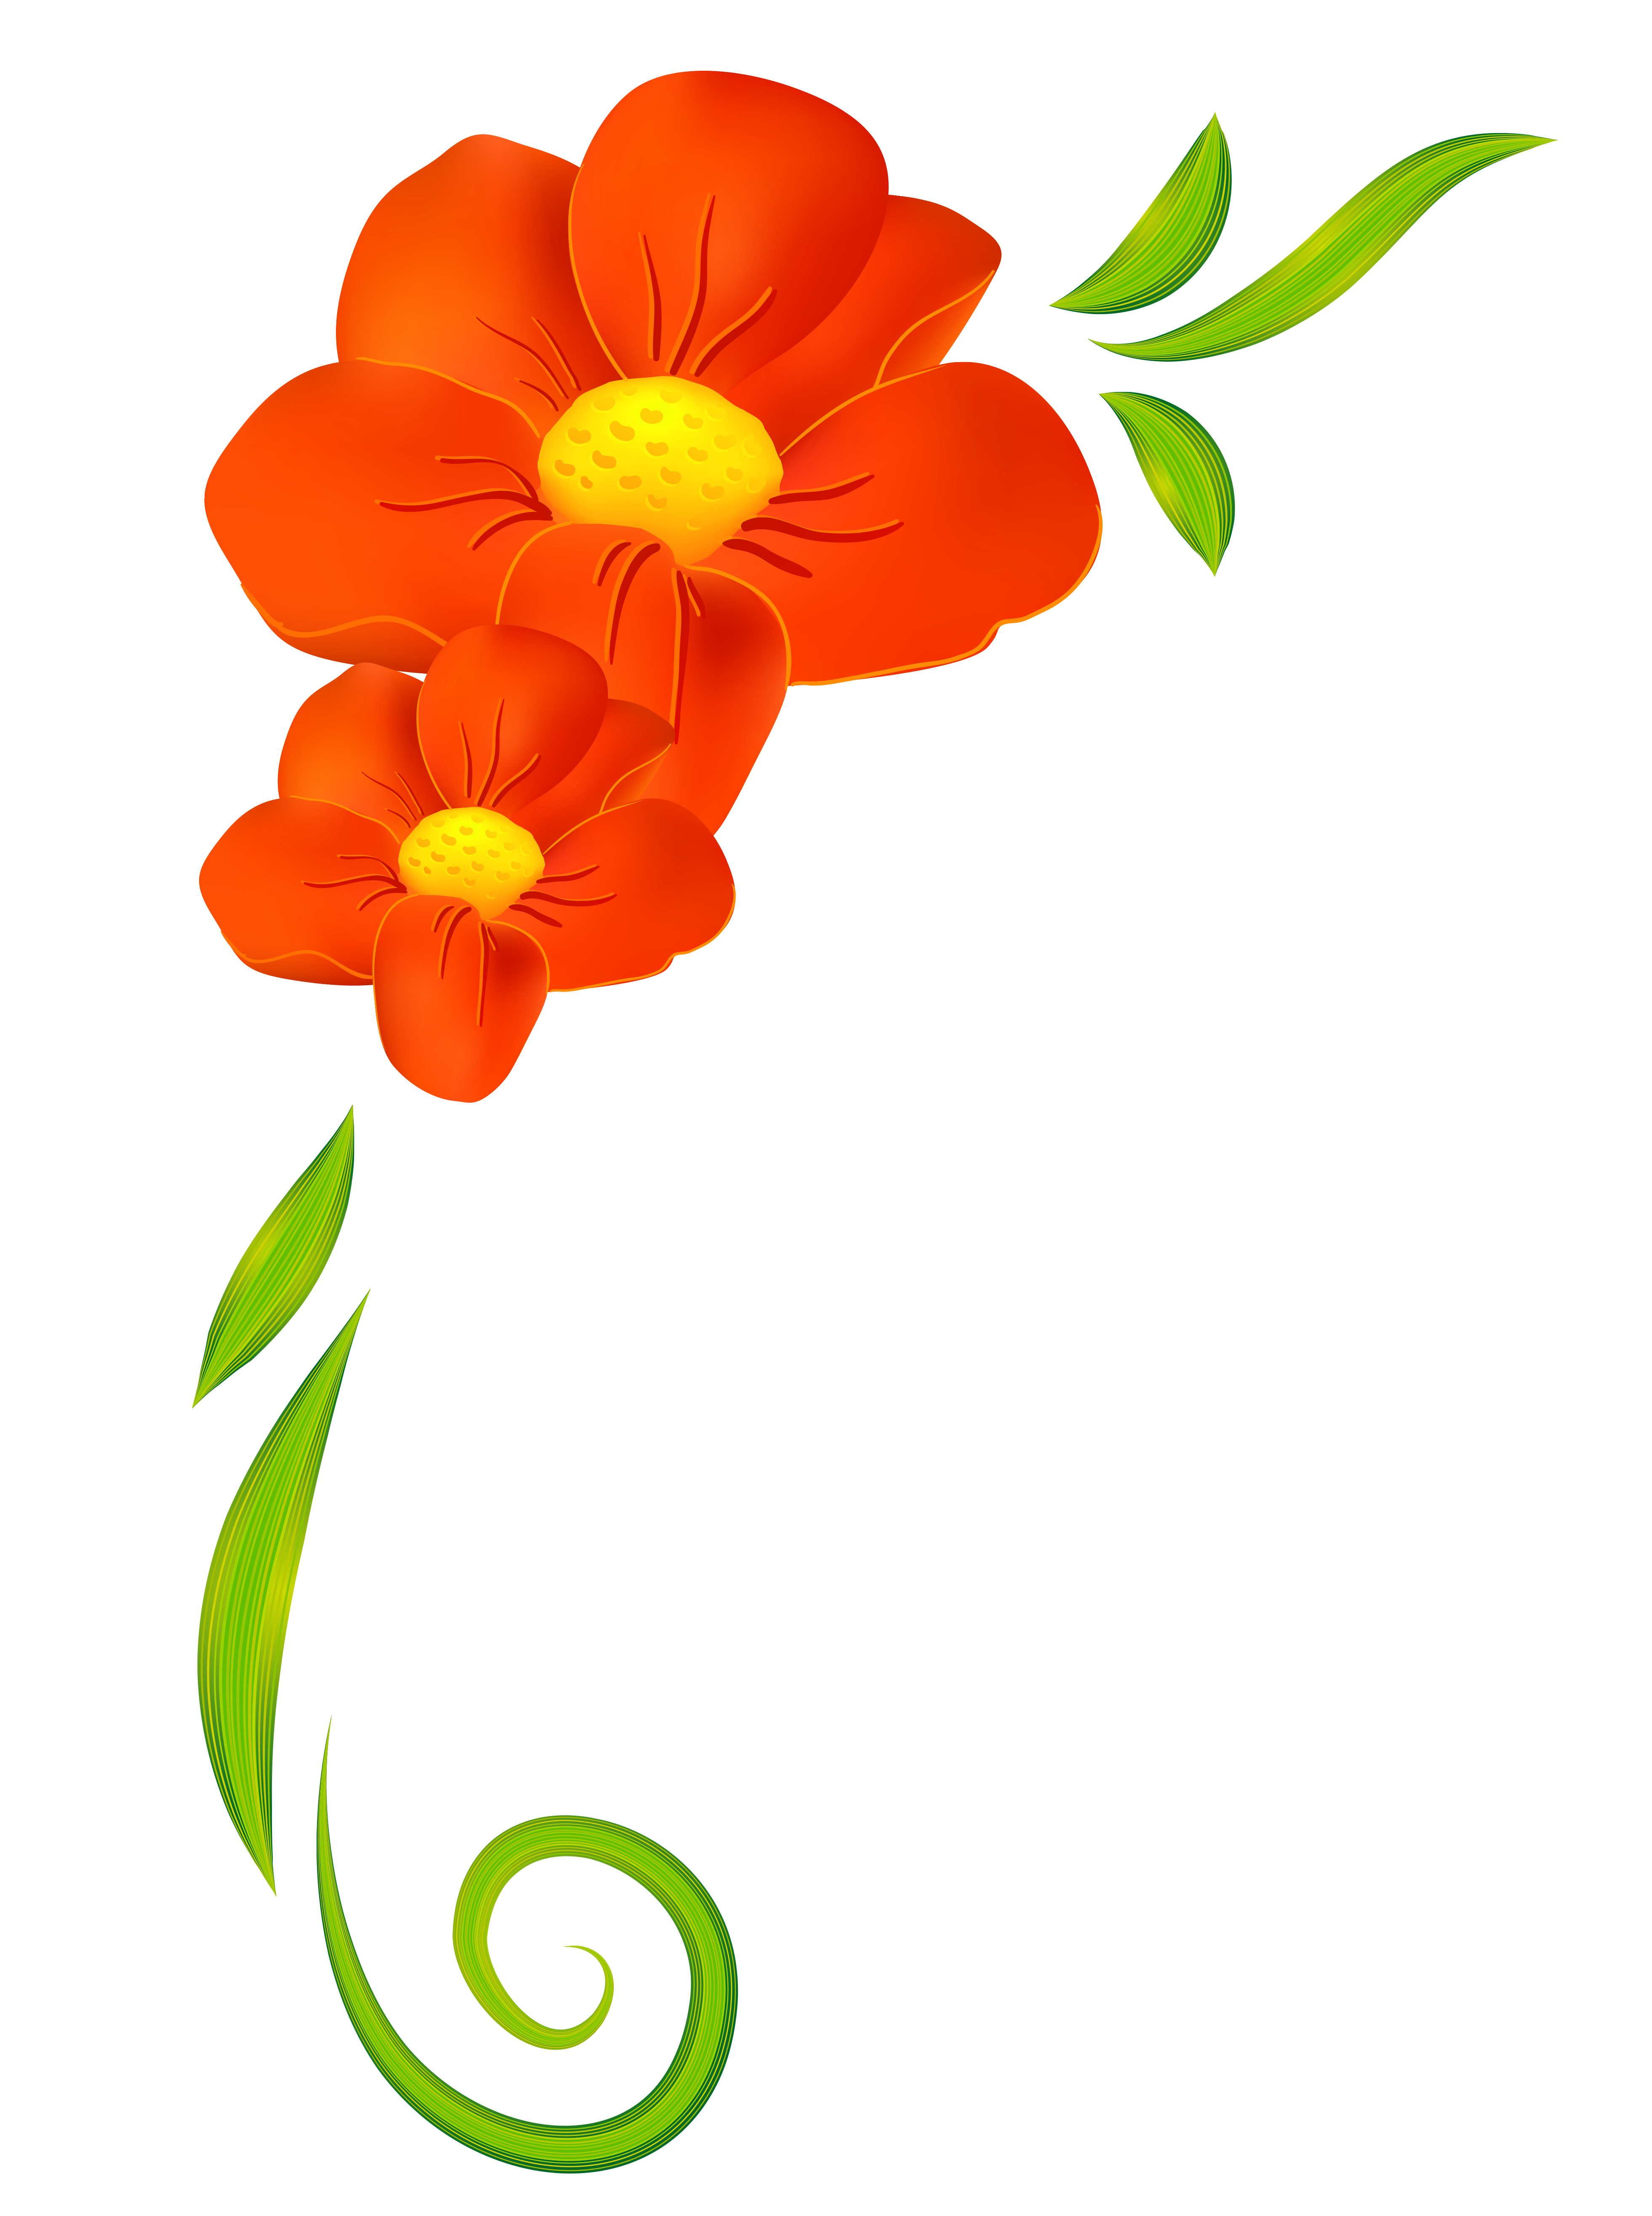 Free Orange Flowers Png Download Free Clip Art Free Clip Art On Clipart Library,Bombay Gin And Tonic Recipe